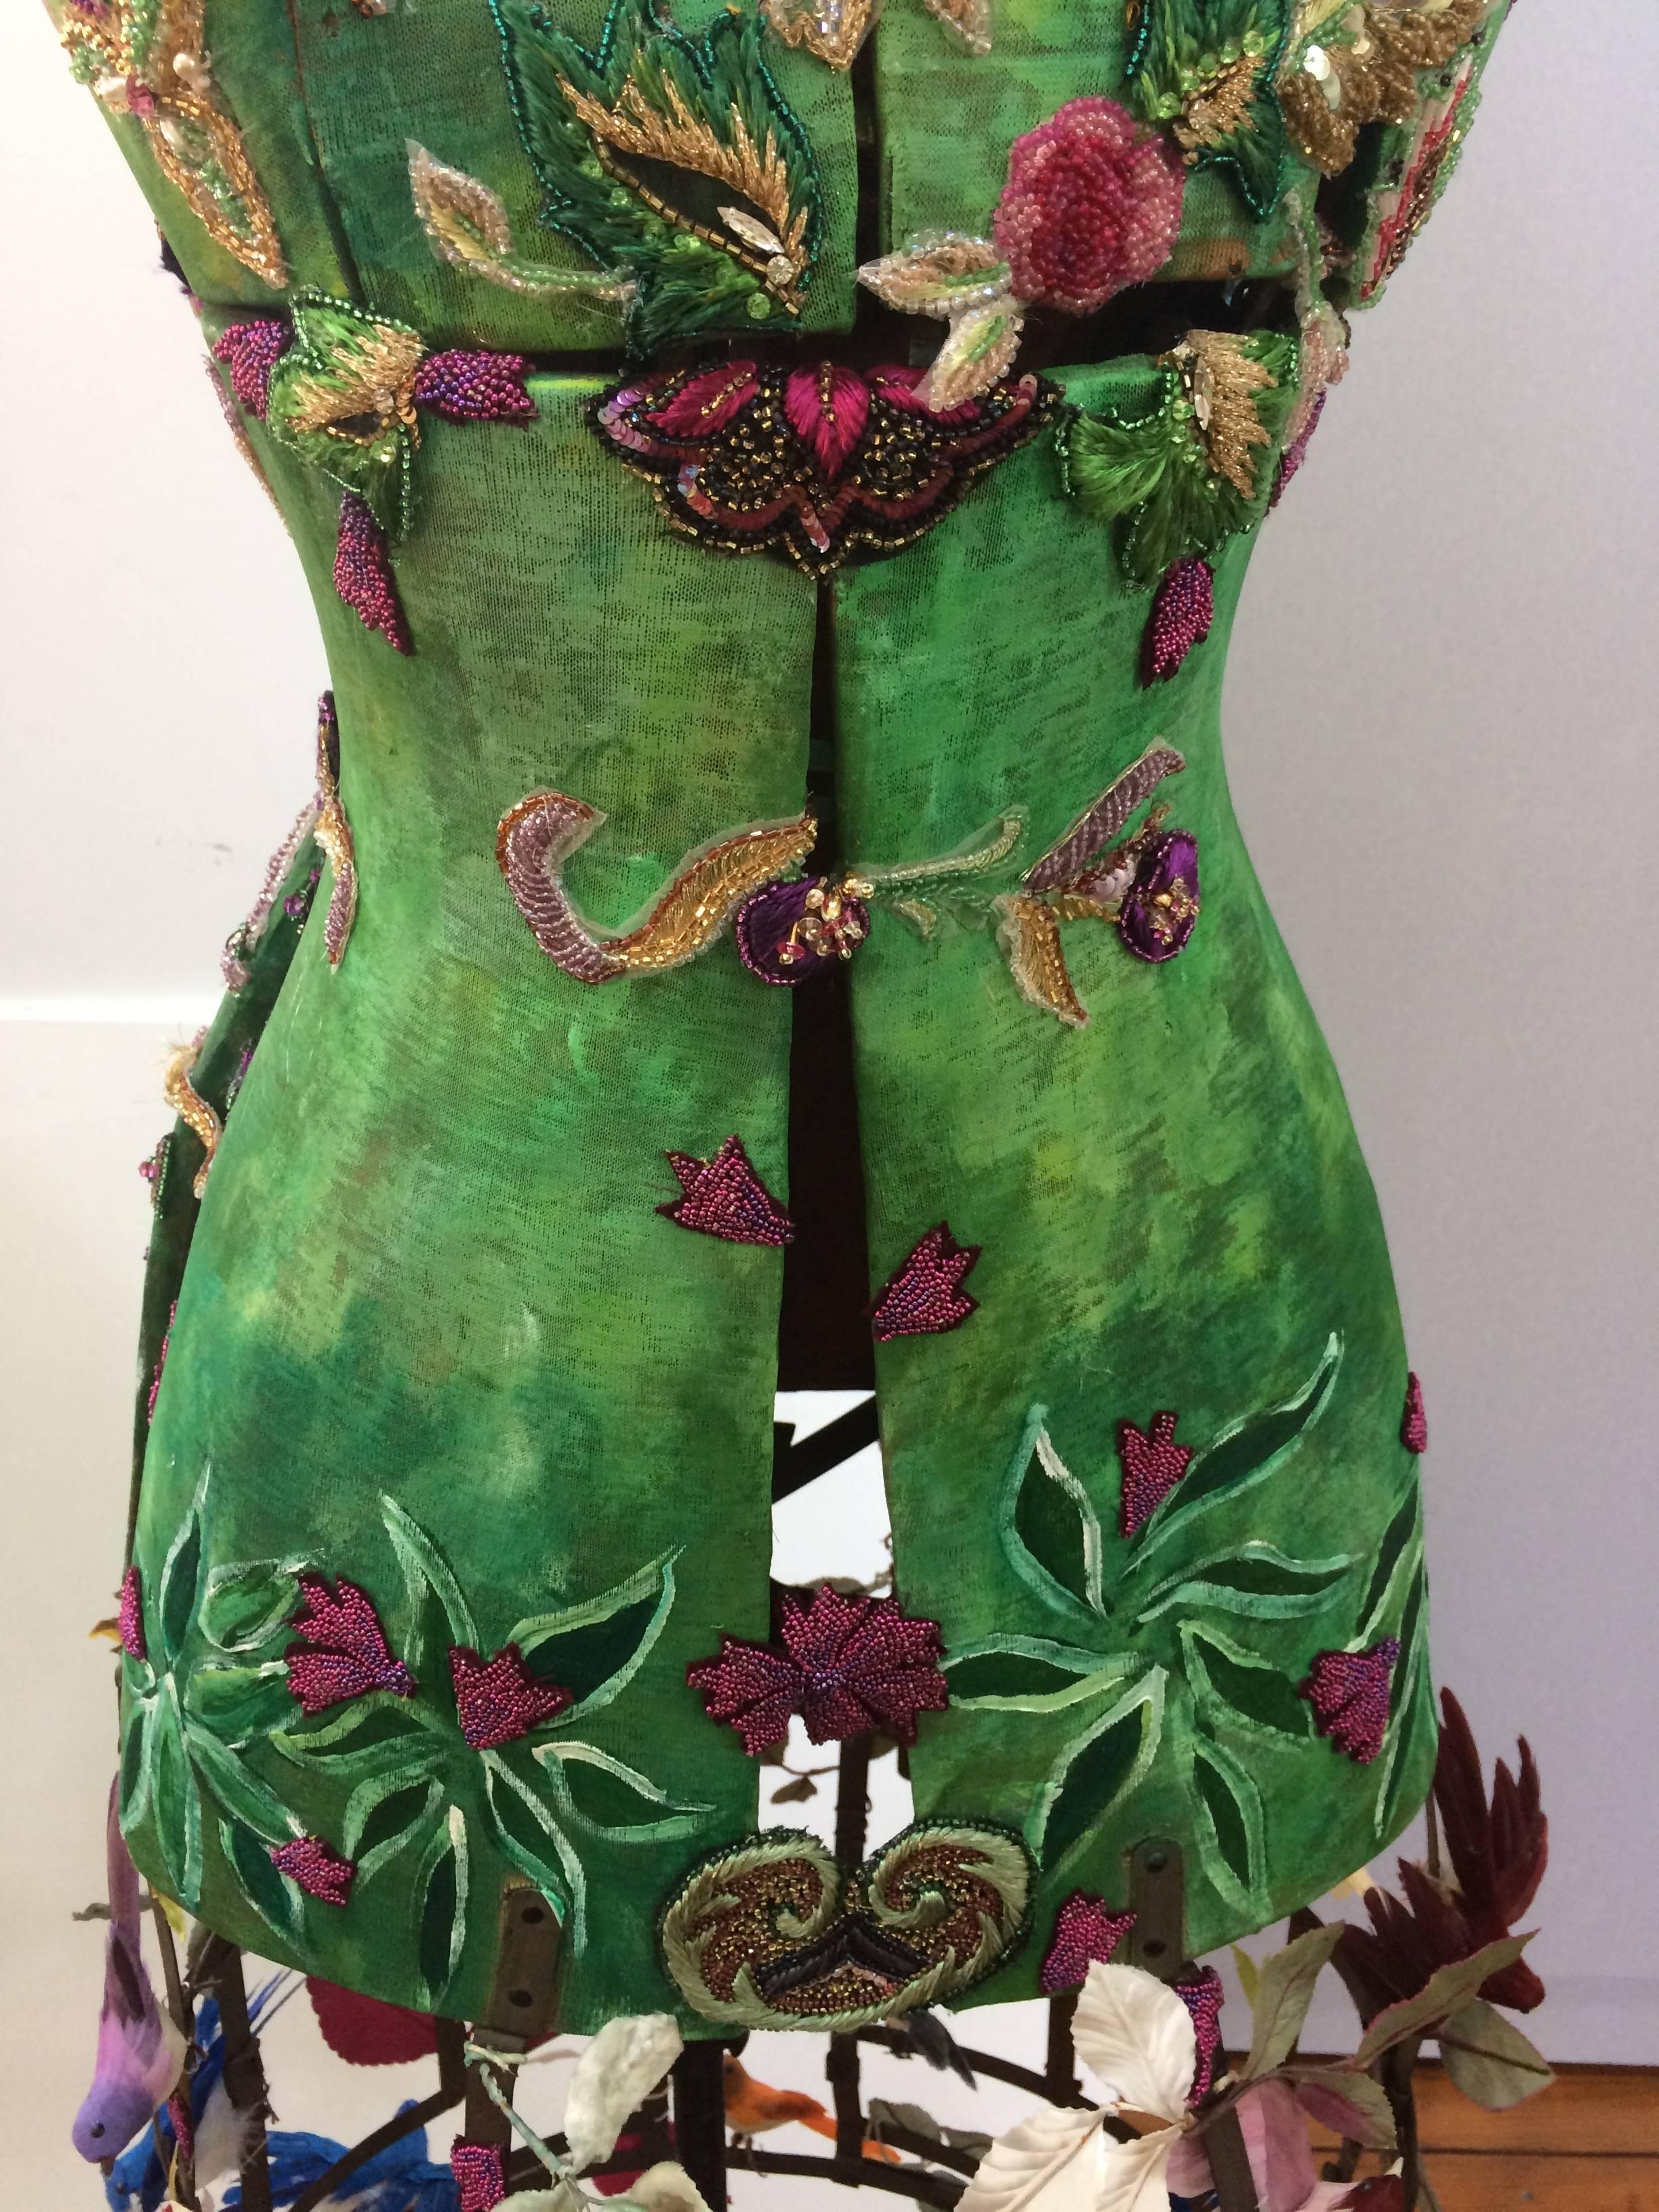 American Incredibly Enchanting Mixed-Media Dress Form Sculpture Titled Spring